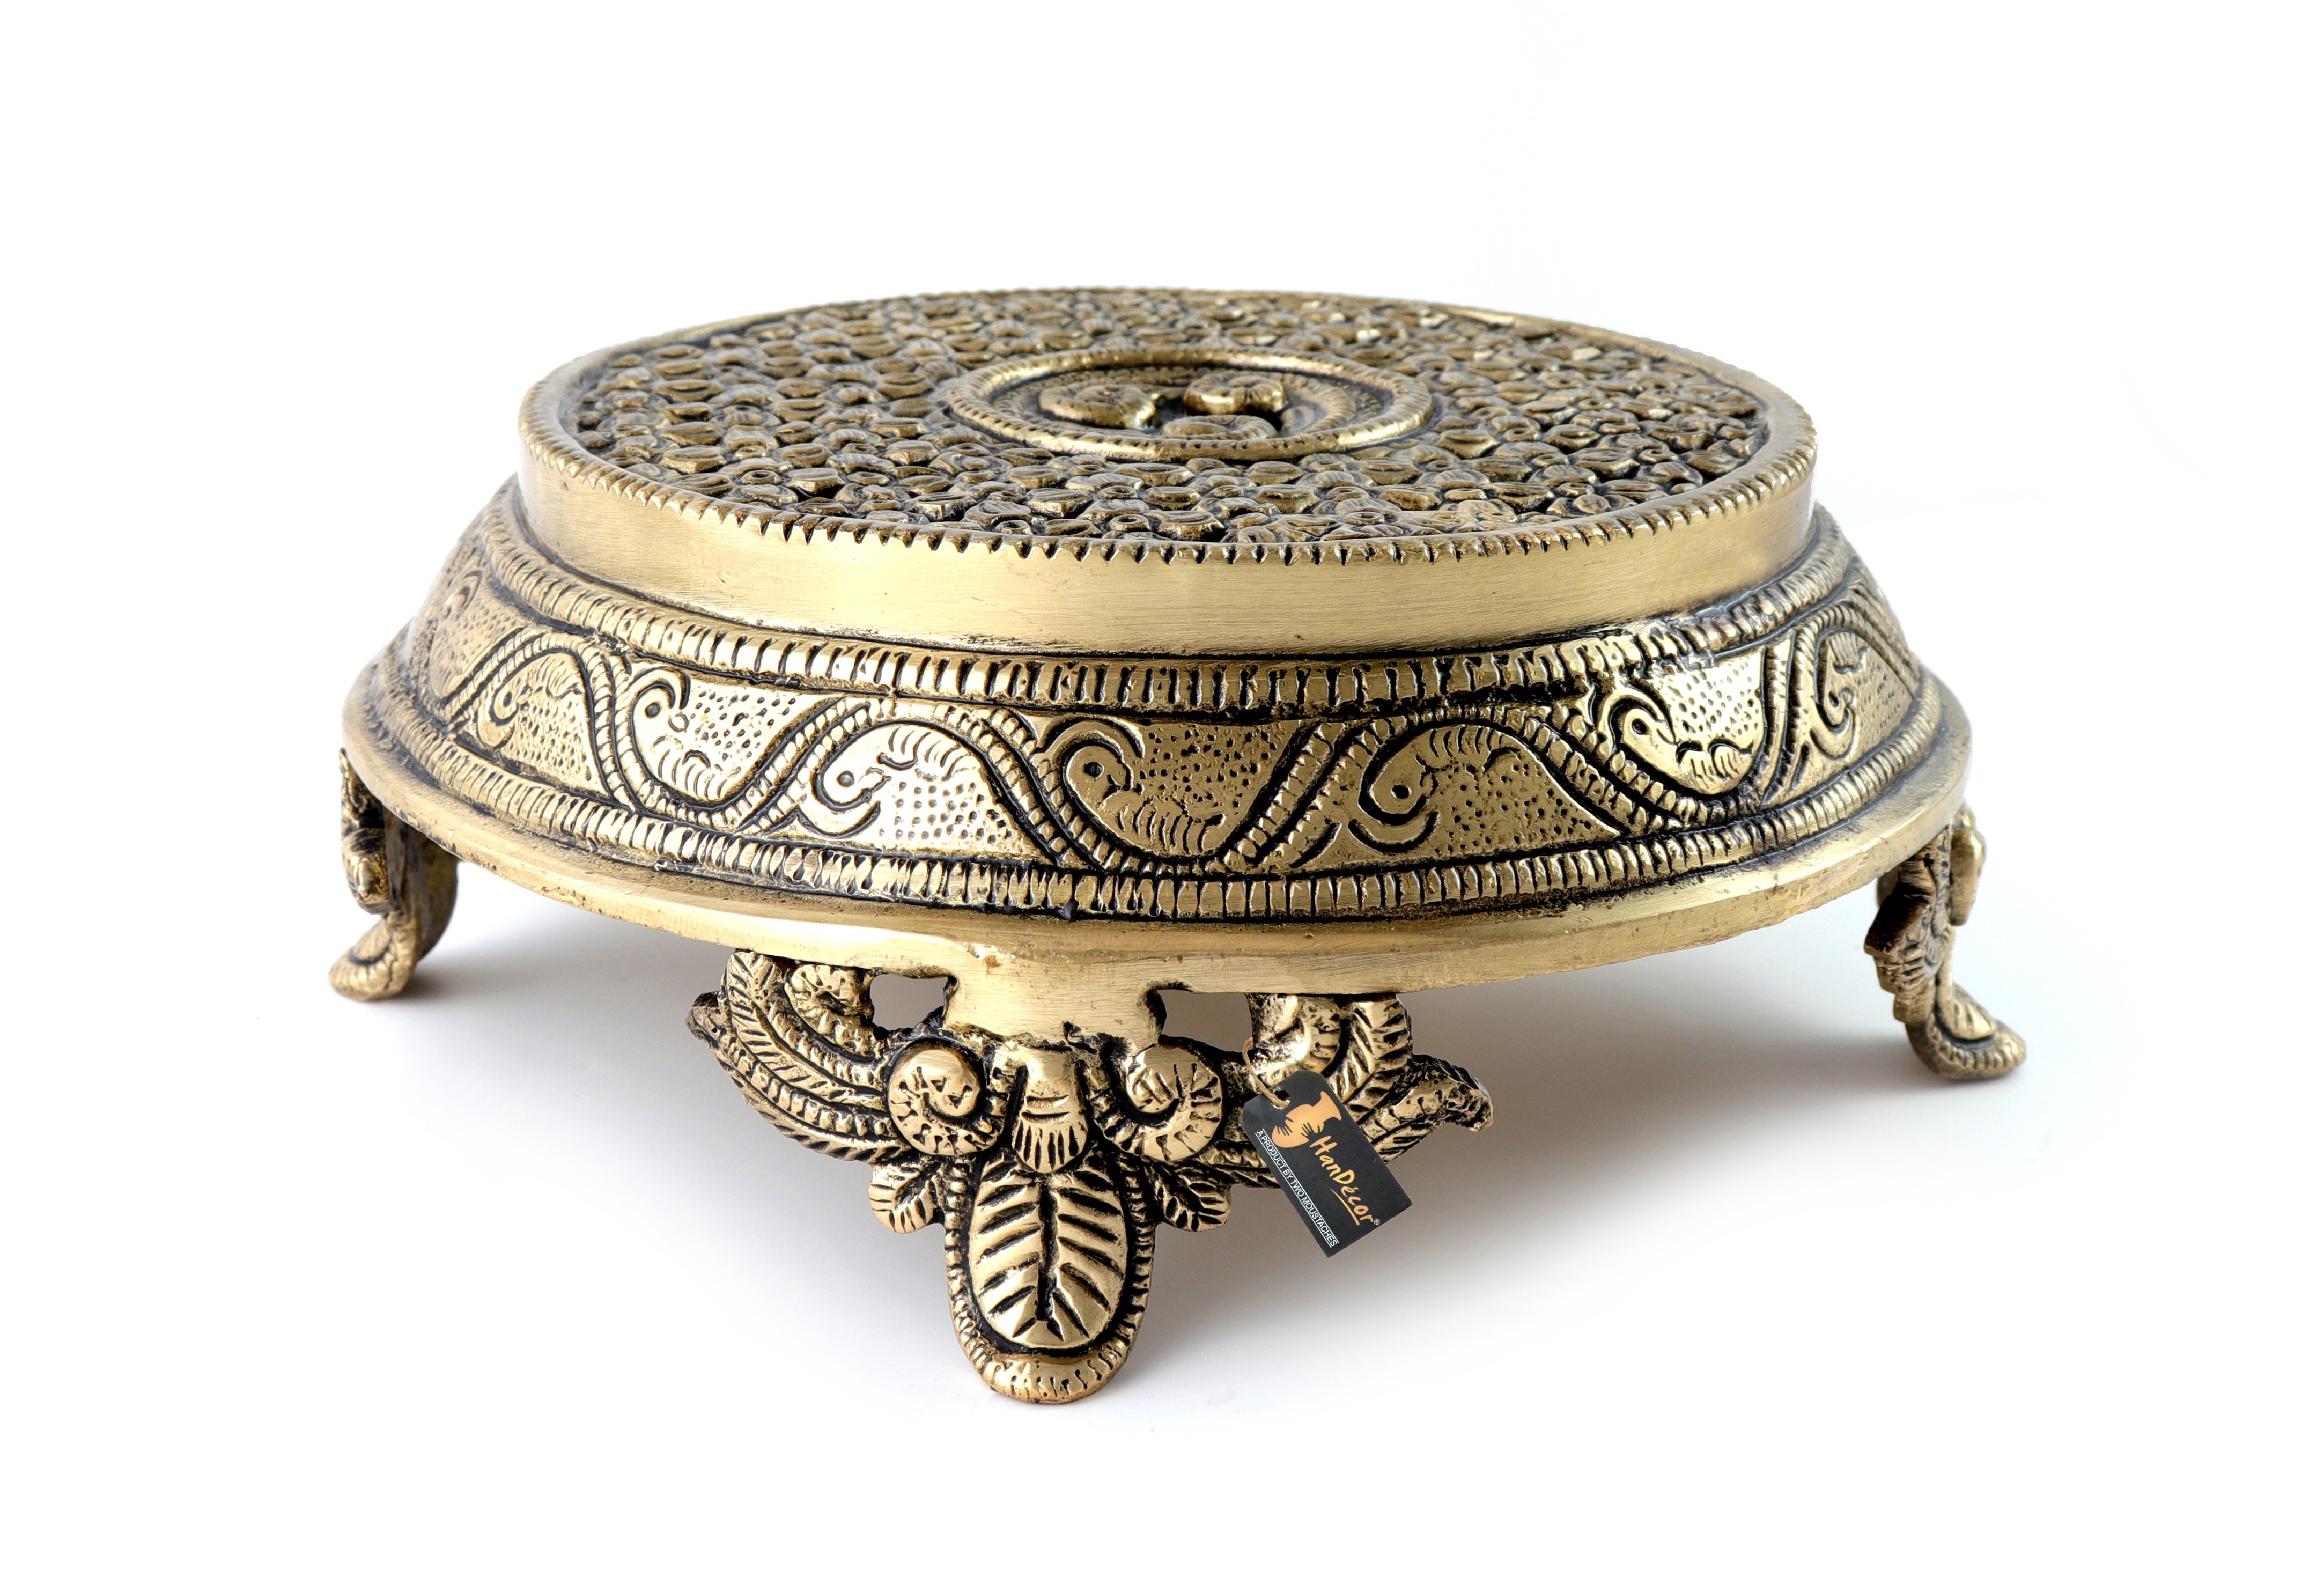 Brass Ethnic Indian Handcrafted Round Chowki with 4 Carved Legs, Antique White